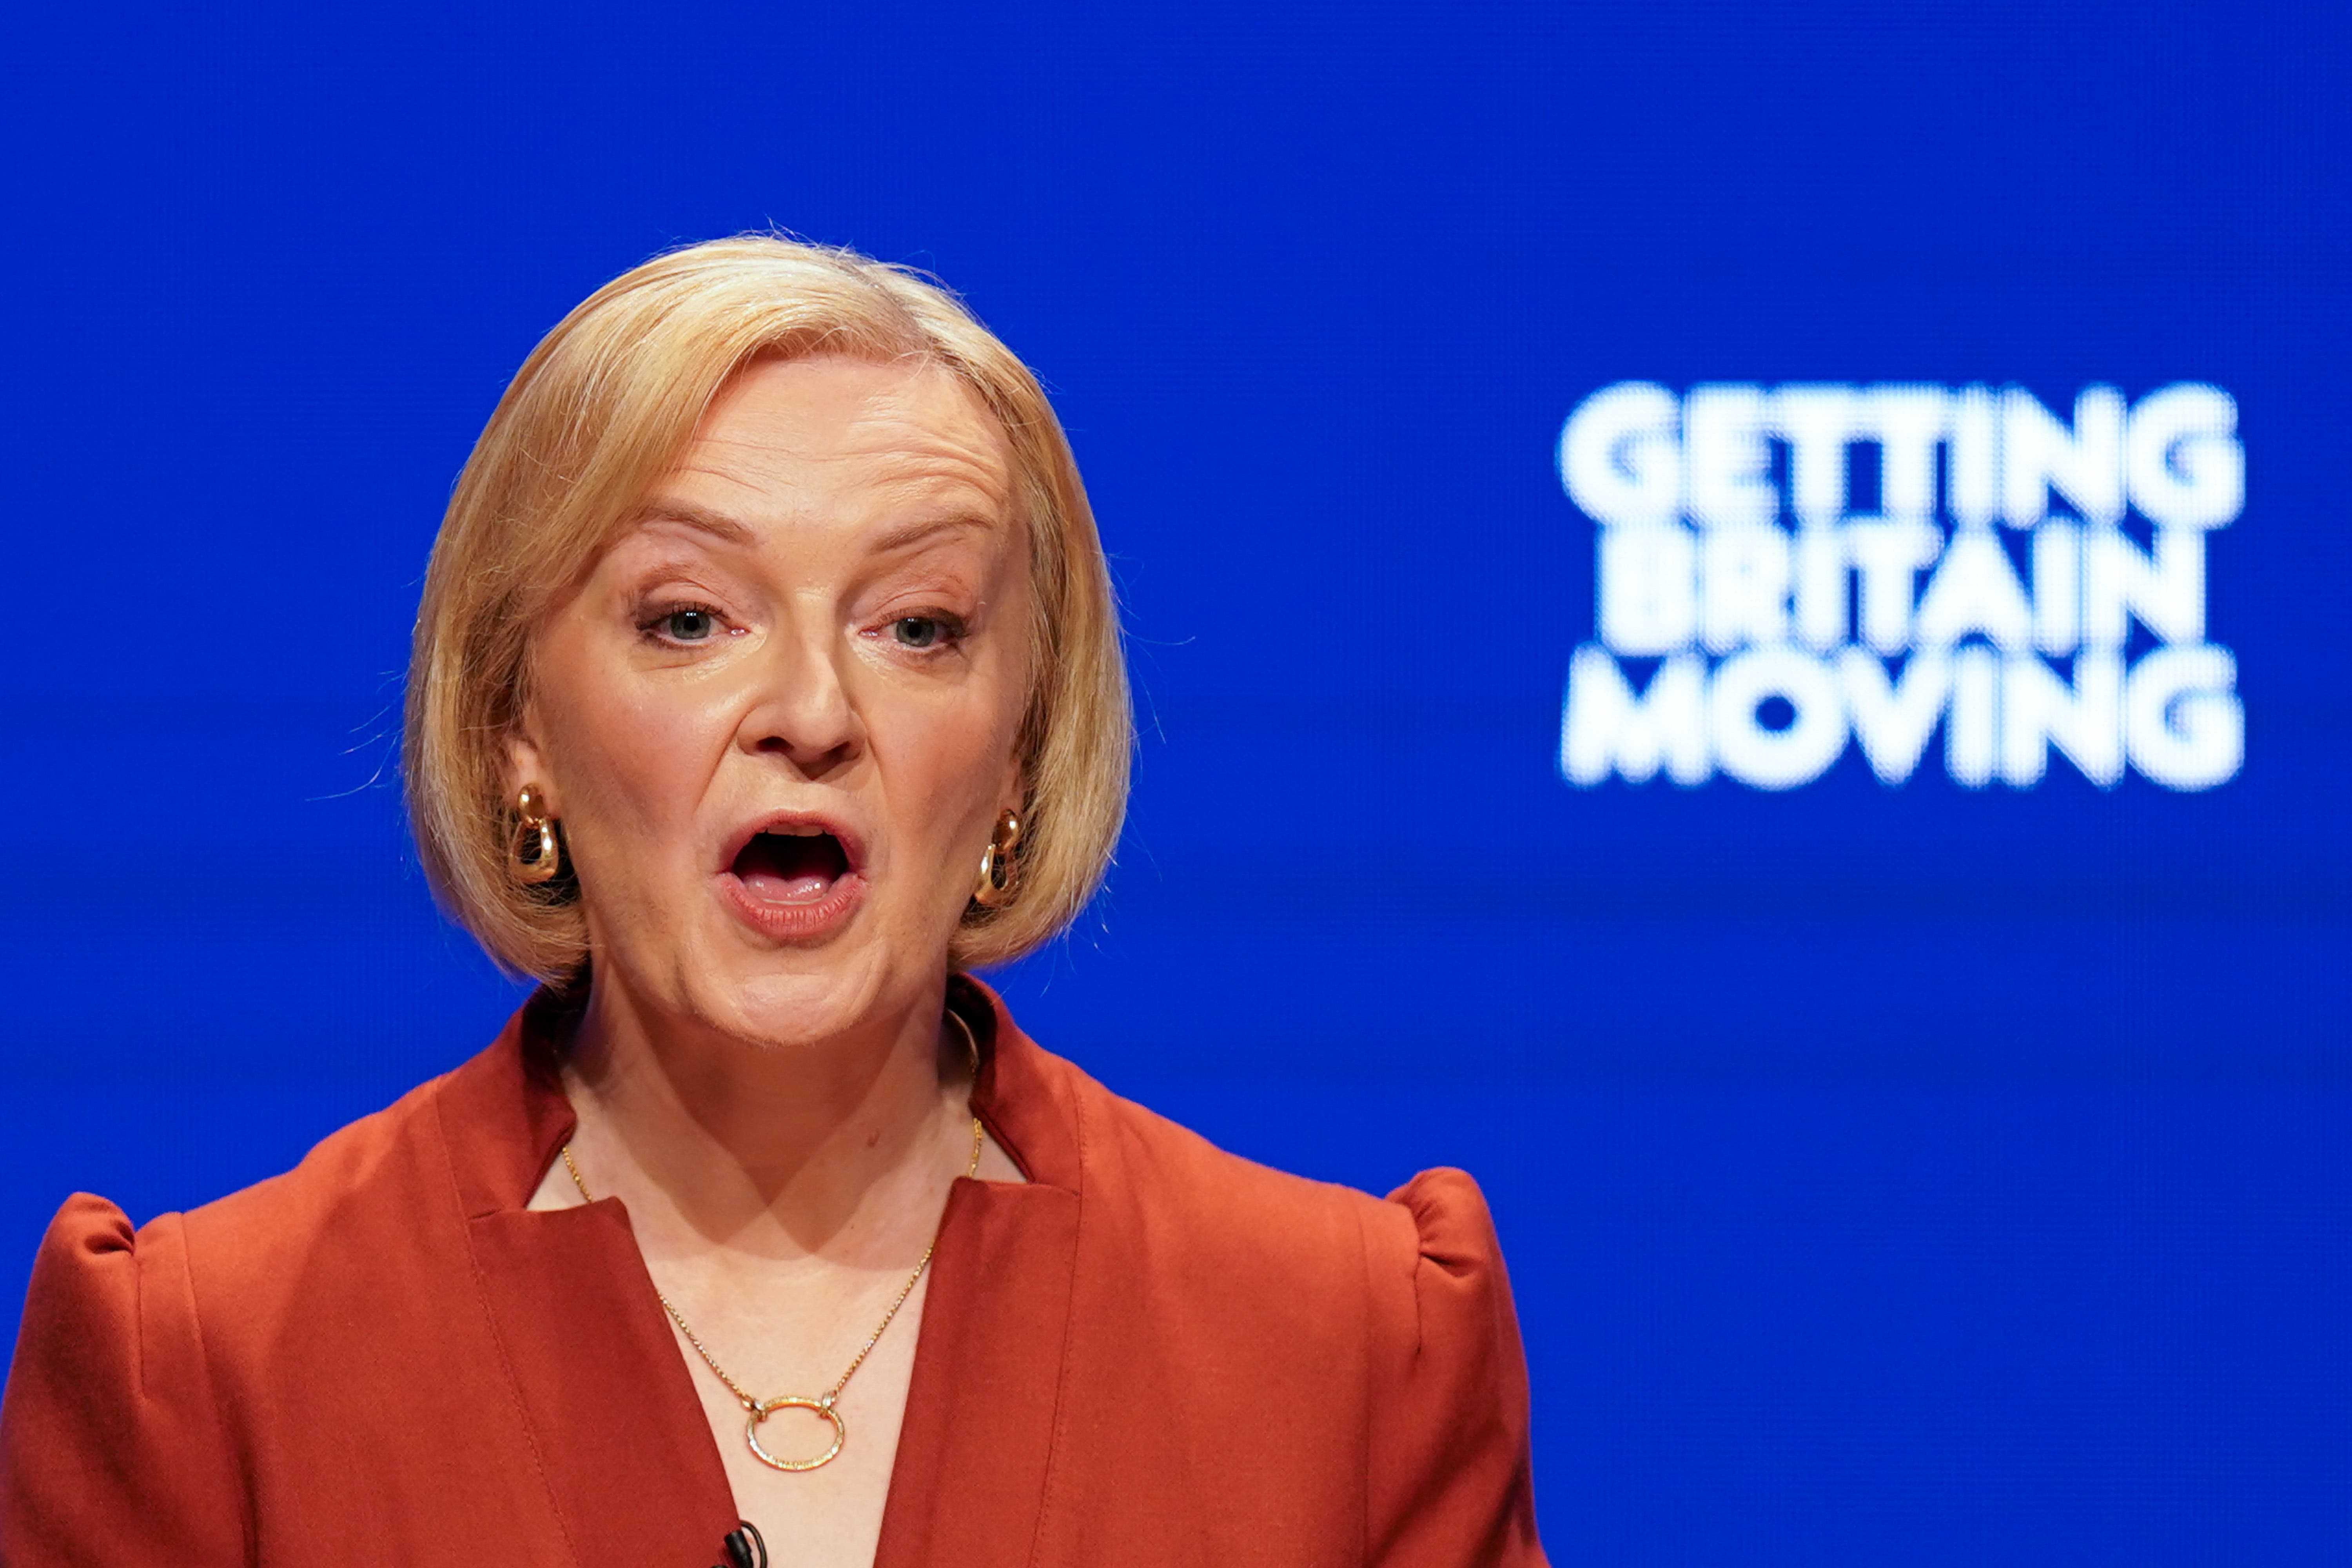 Liz Truss delivering her keynote speech at the Conservative Party annual conference at the International Convention Centre in Birmingham. Liz Truss has announced she will resign as Prime Minister (Jacob King/PA)